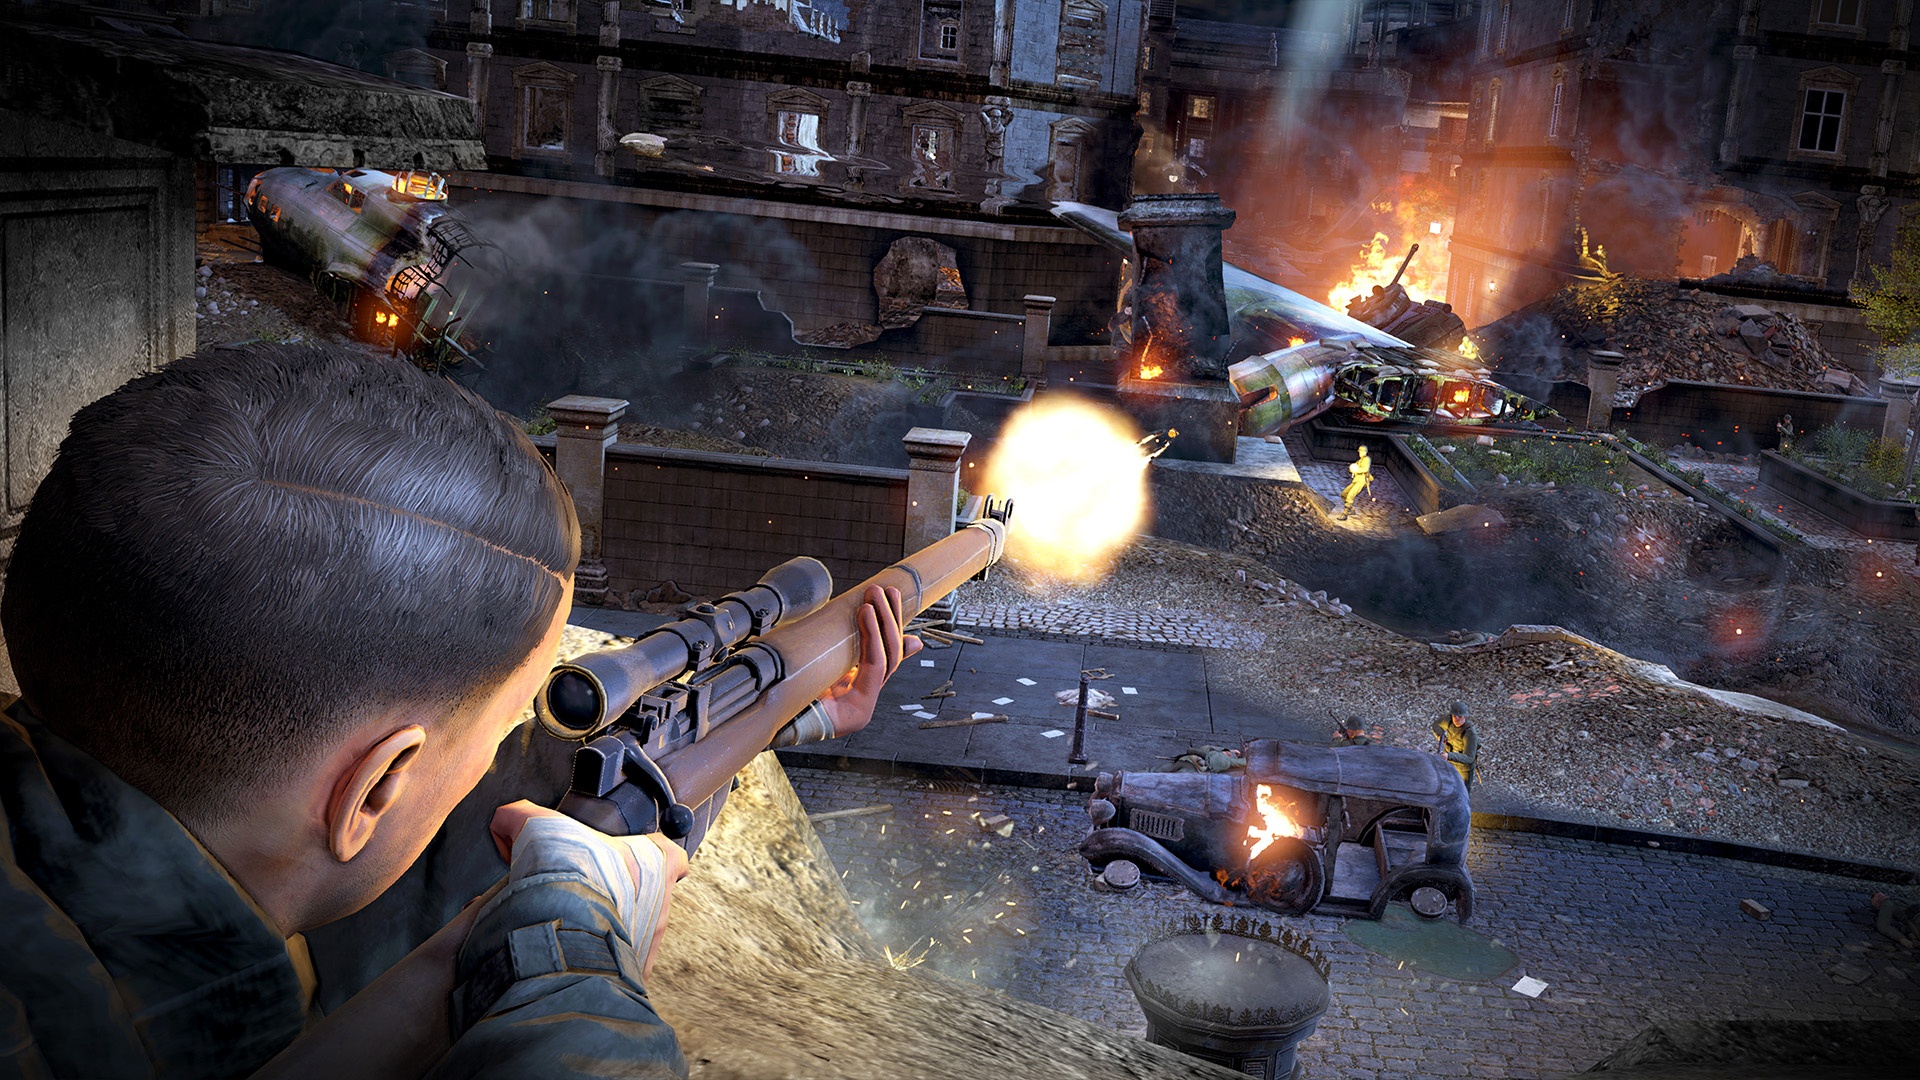 Action, Gore, Nintendo Switch Review, Shooter, Sniper, Sniper Elite, Sniper Elite V2 Remastered, Sniper Elite V2 Remastered Review, Switch Review, Tactical, third-person, Violent, World War II